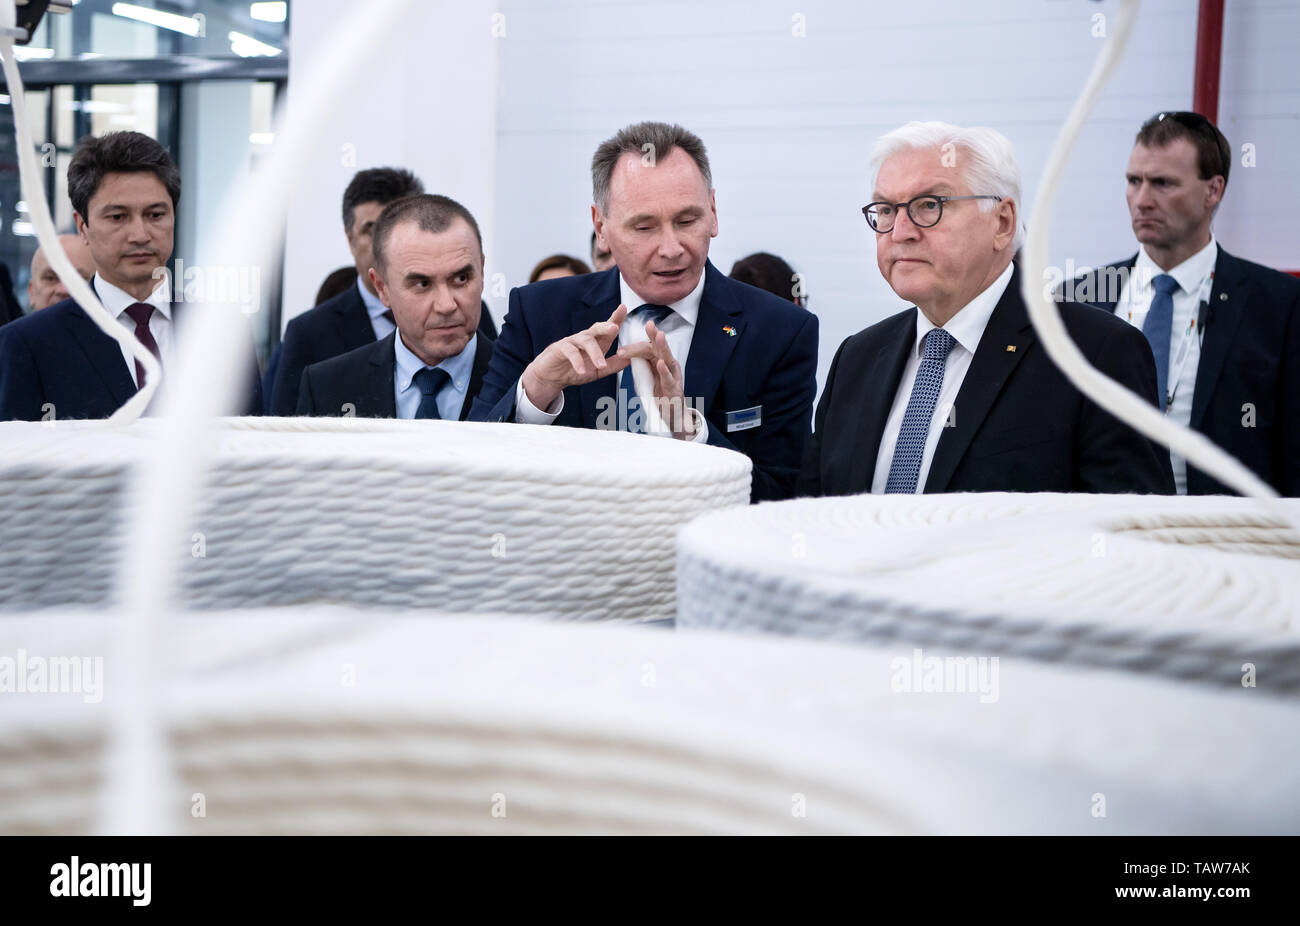 Taschkent, Uzbekistan. 28th May, 2019. Federal President Frank-Walter Steinmeier (r) visits the Bakan Tex yarn spinning mill and is guided through the production facilities by Witali Schulz (M), Regional Manager of Trützschler Textilmaschinenfabrik, and by General Director Botir Muchitdinow (l). President Steinmeier and his wife are on a two-day state visit to Uzbekistan. They are accompanied by numerous business representatives and cultural workers. Credit: Bernd von Jutrczenka/dpa/Alamy Live News Stock Photo